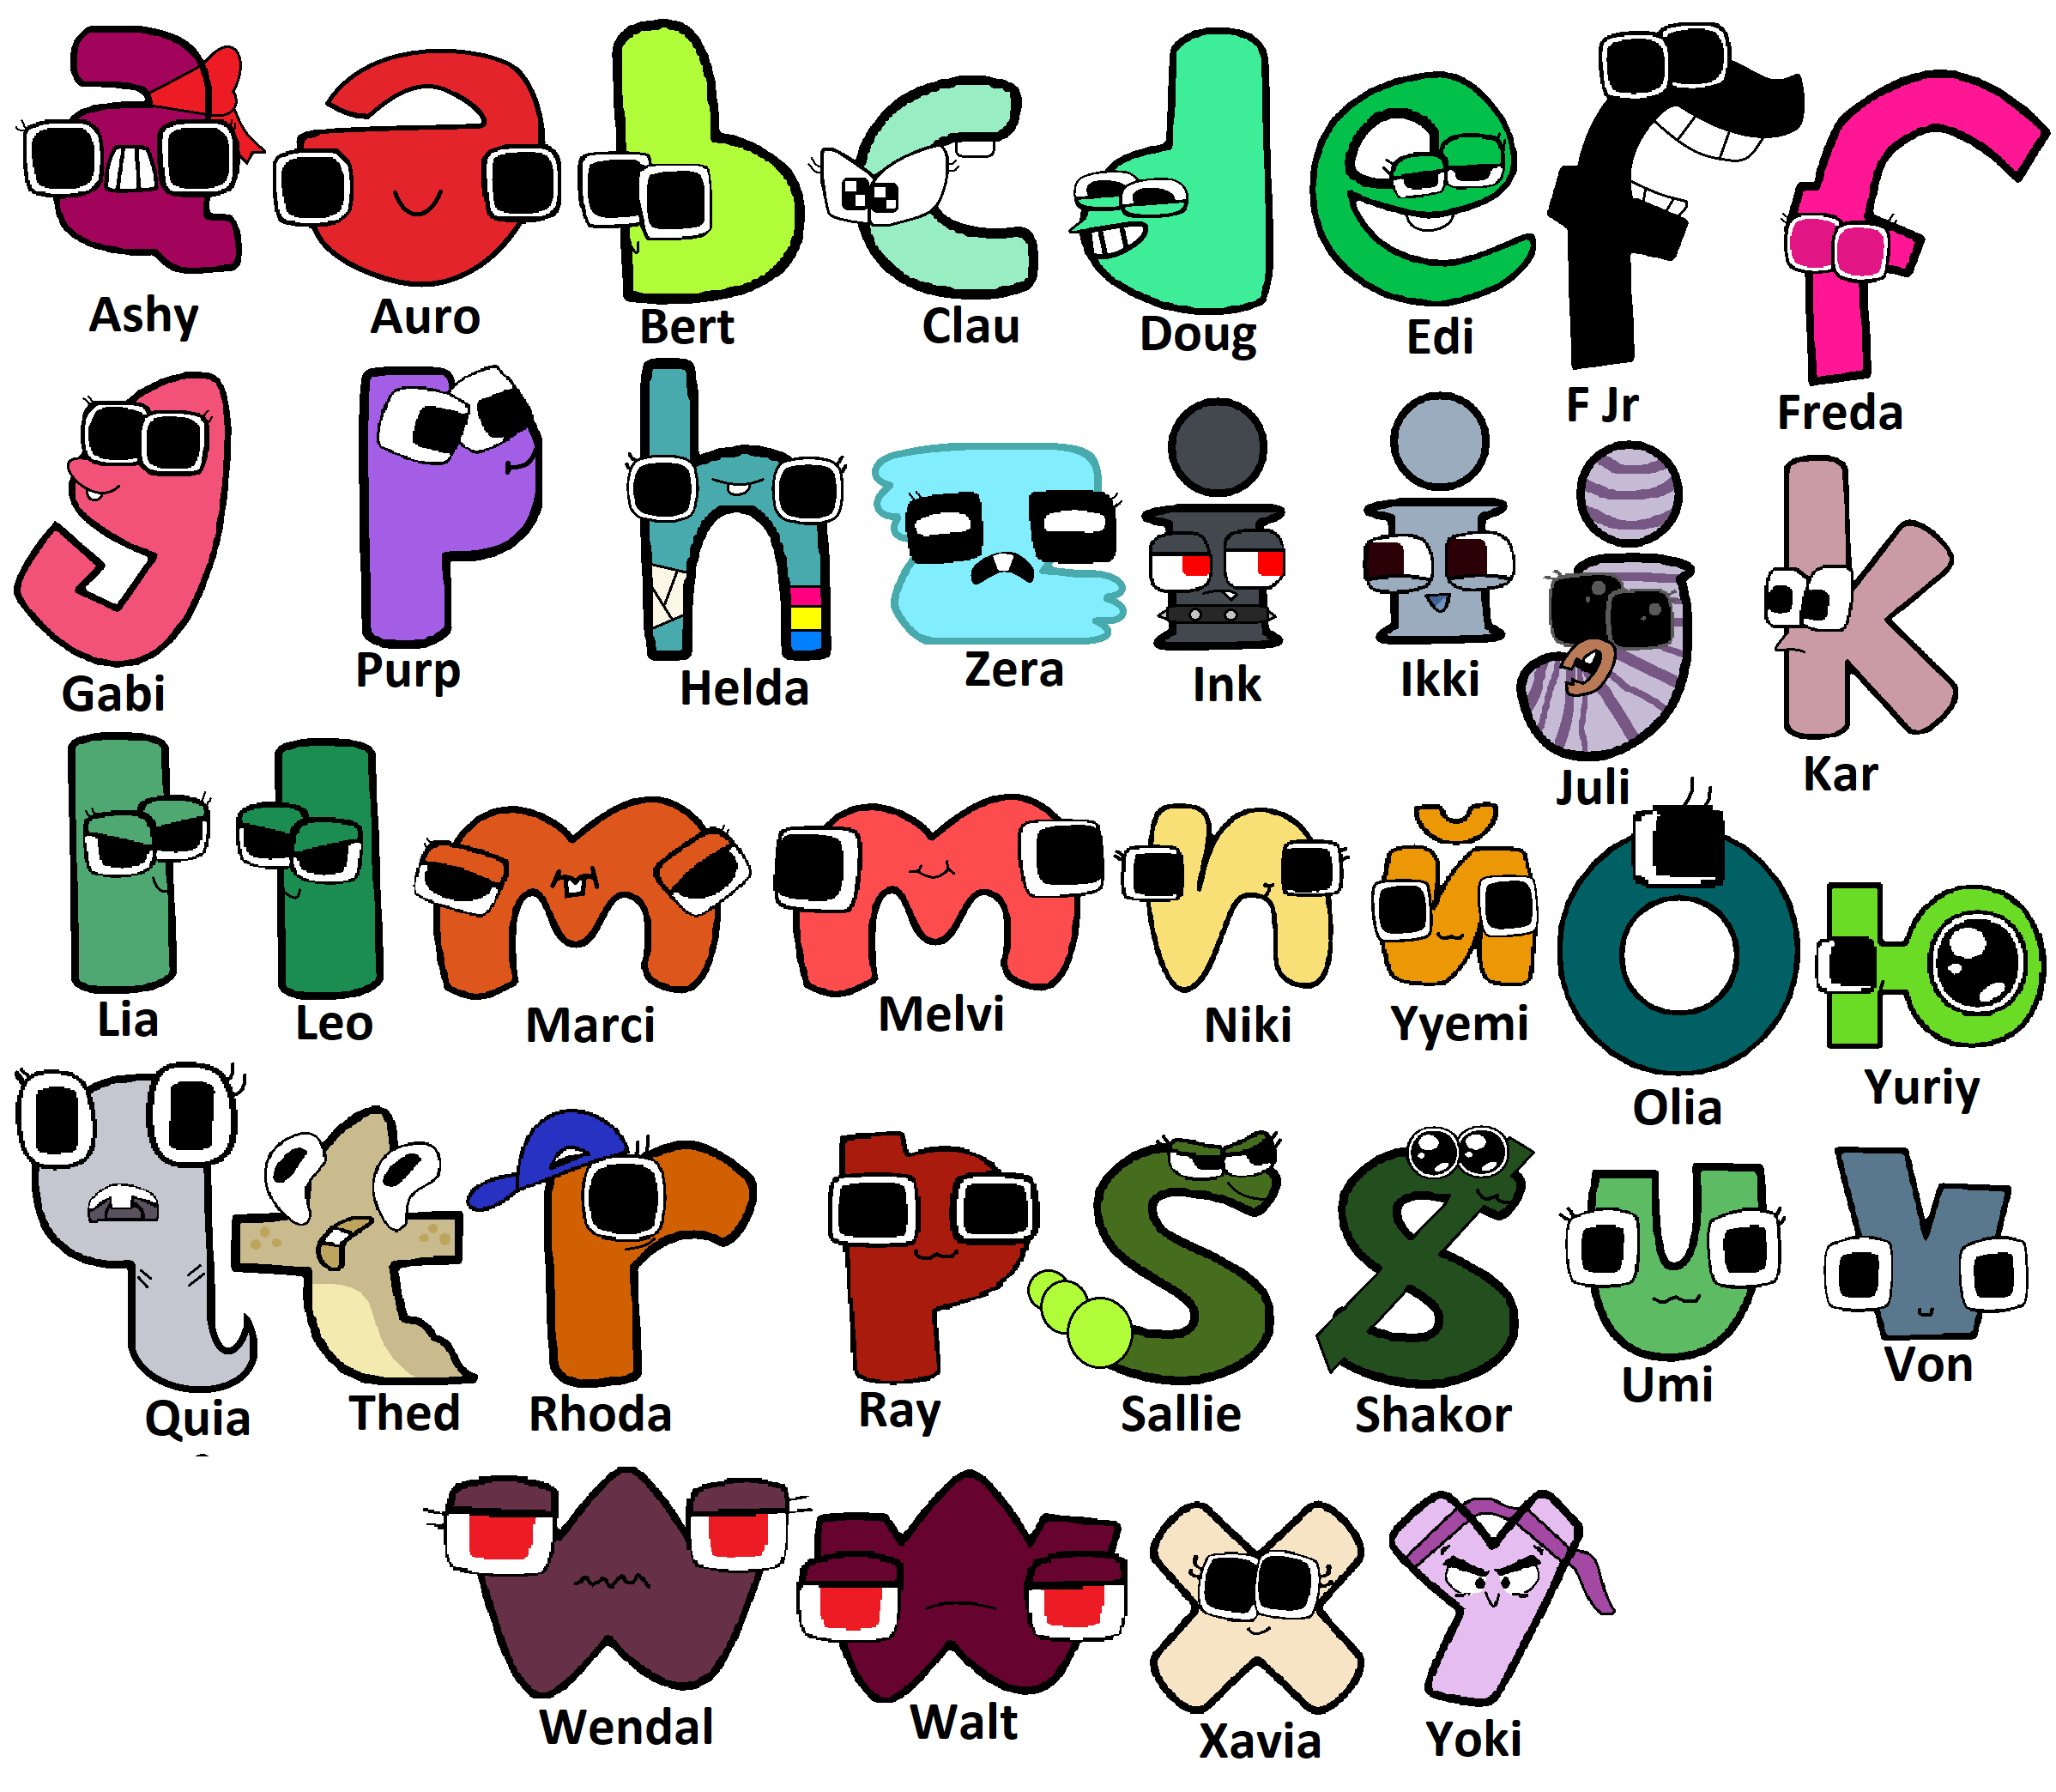 When Closhy's Alphabet Lore And Cringy Baby Alphabet Lore Join Forces :  r/alphabetfriends